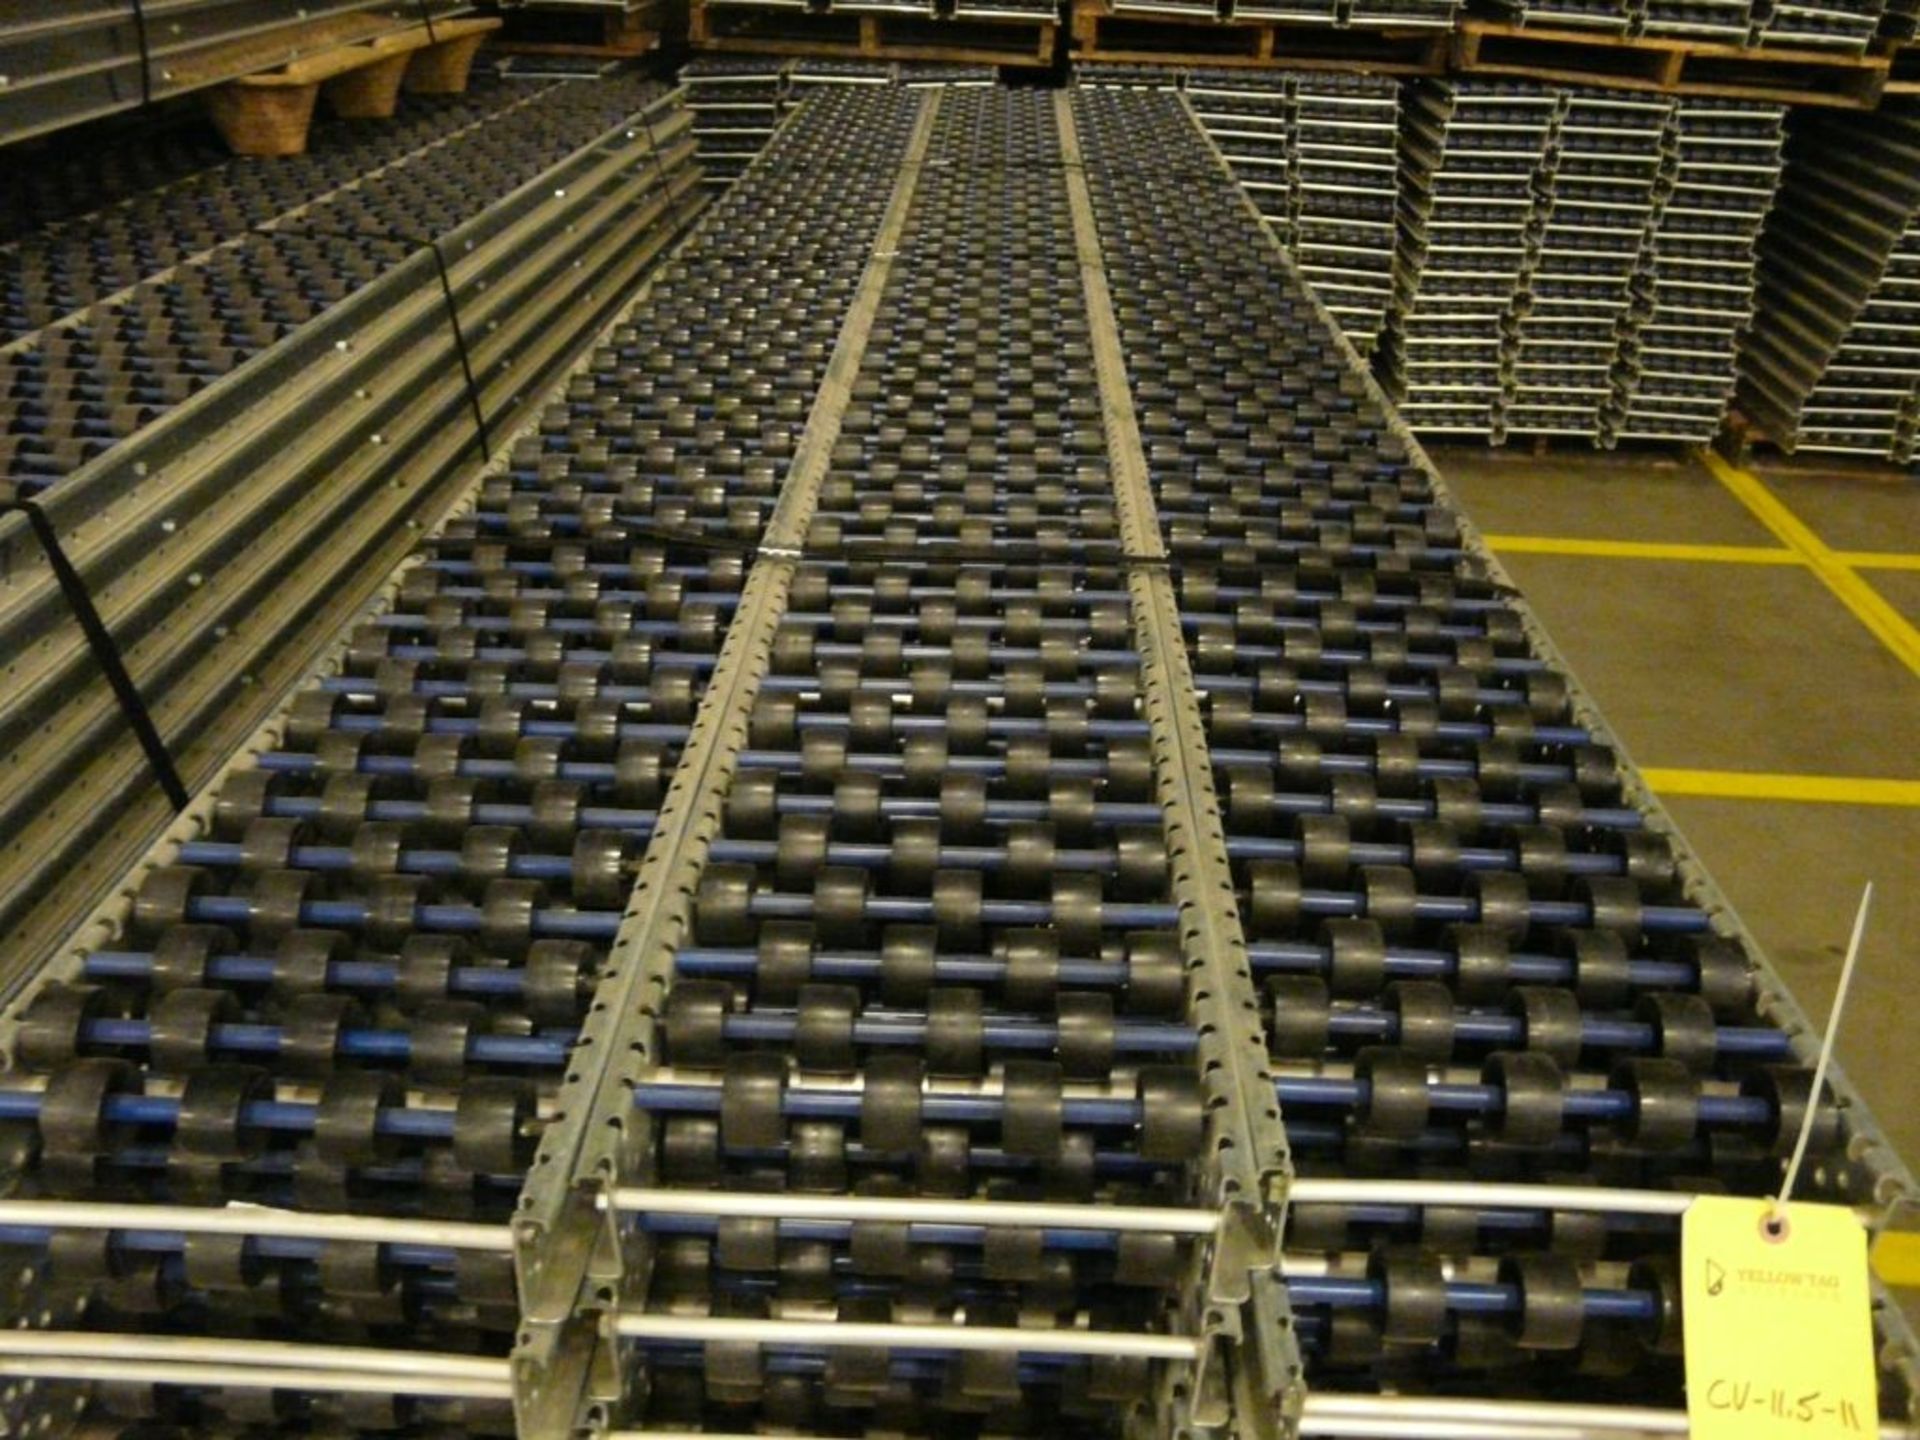 Lot of (90) SpanTrack Wheelbed Carton Flow Conveyors - 11.5'L x 11"W; Tag: 223570 - $30 Lot - Image 3 of 4